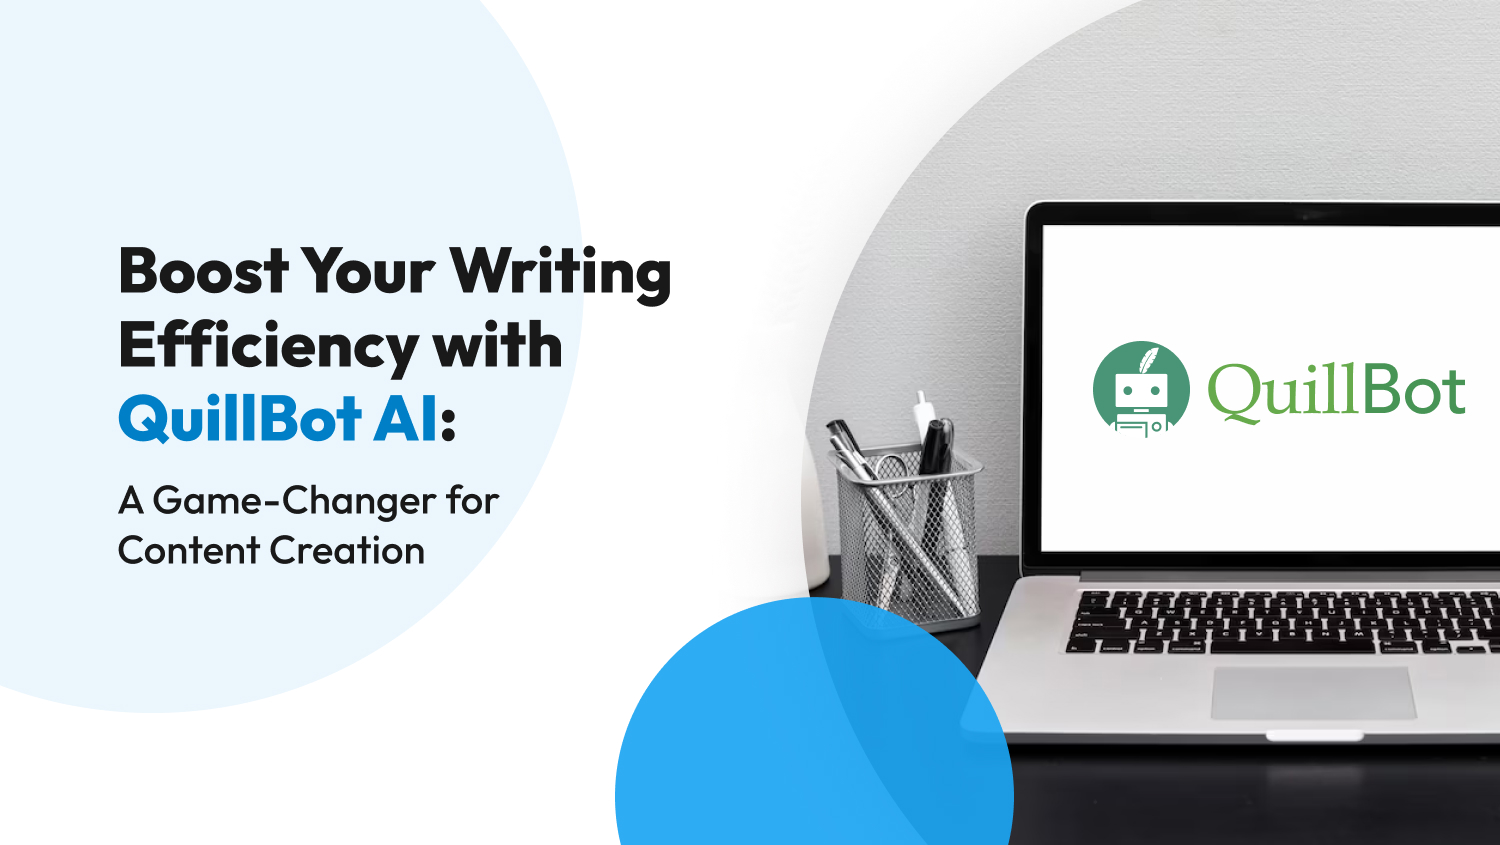 Boost Your Writing Efficiency with QuillBot AI: A Game-Changer for Content Creation